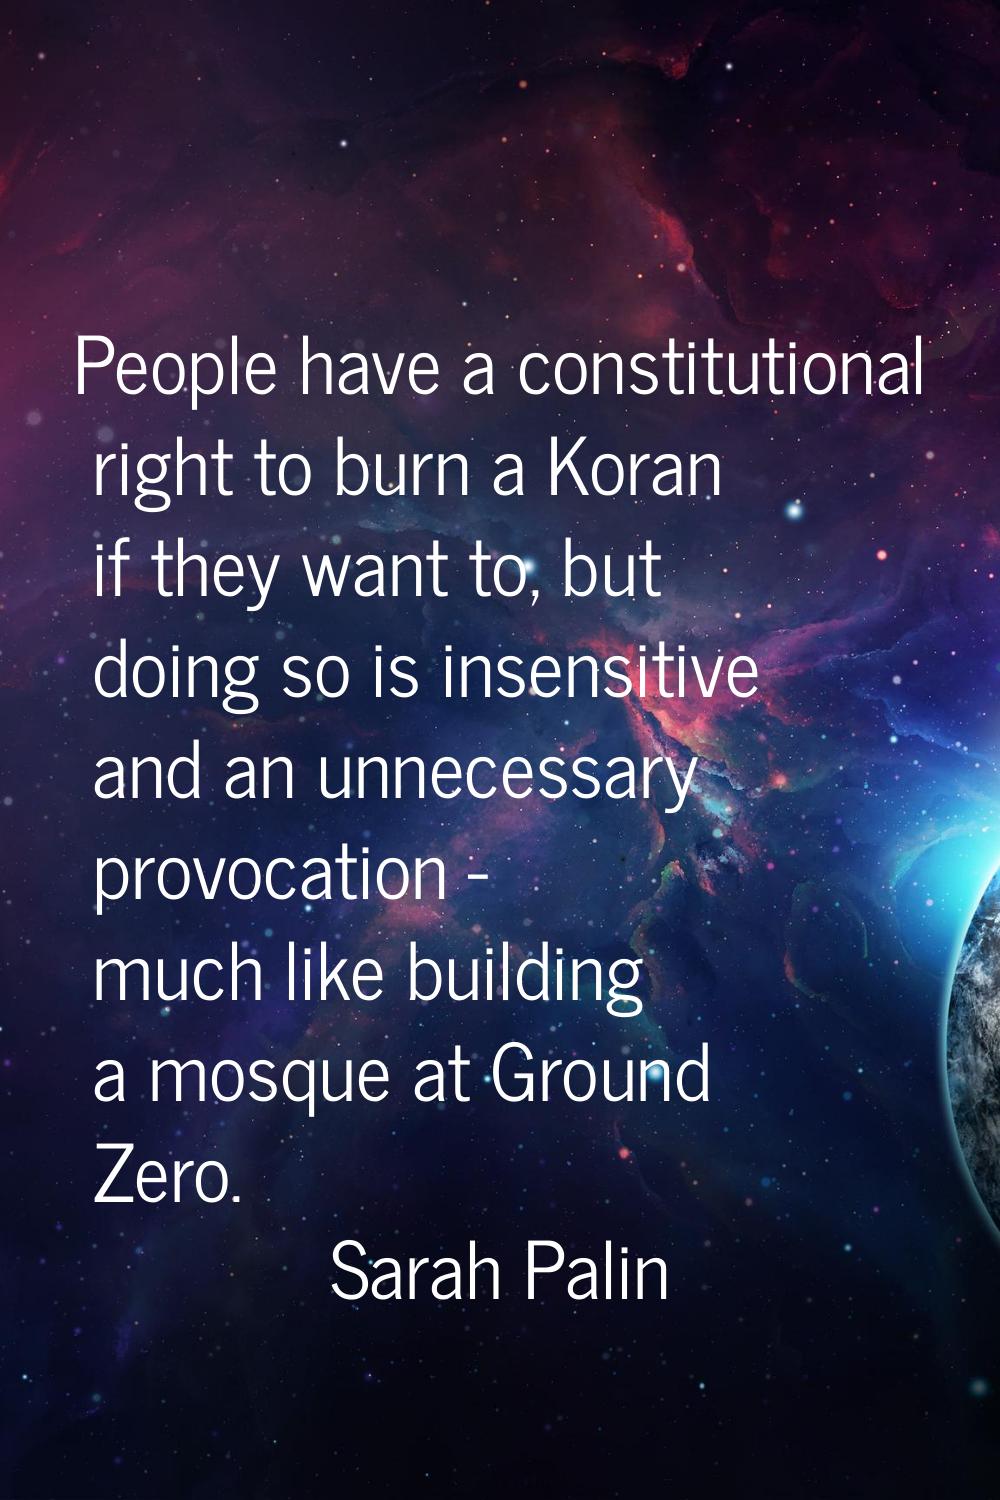 People have a constitutional right to burn a Koran if they want to, but doing so is insensitive and